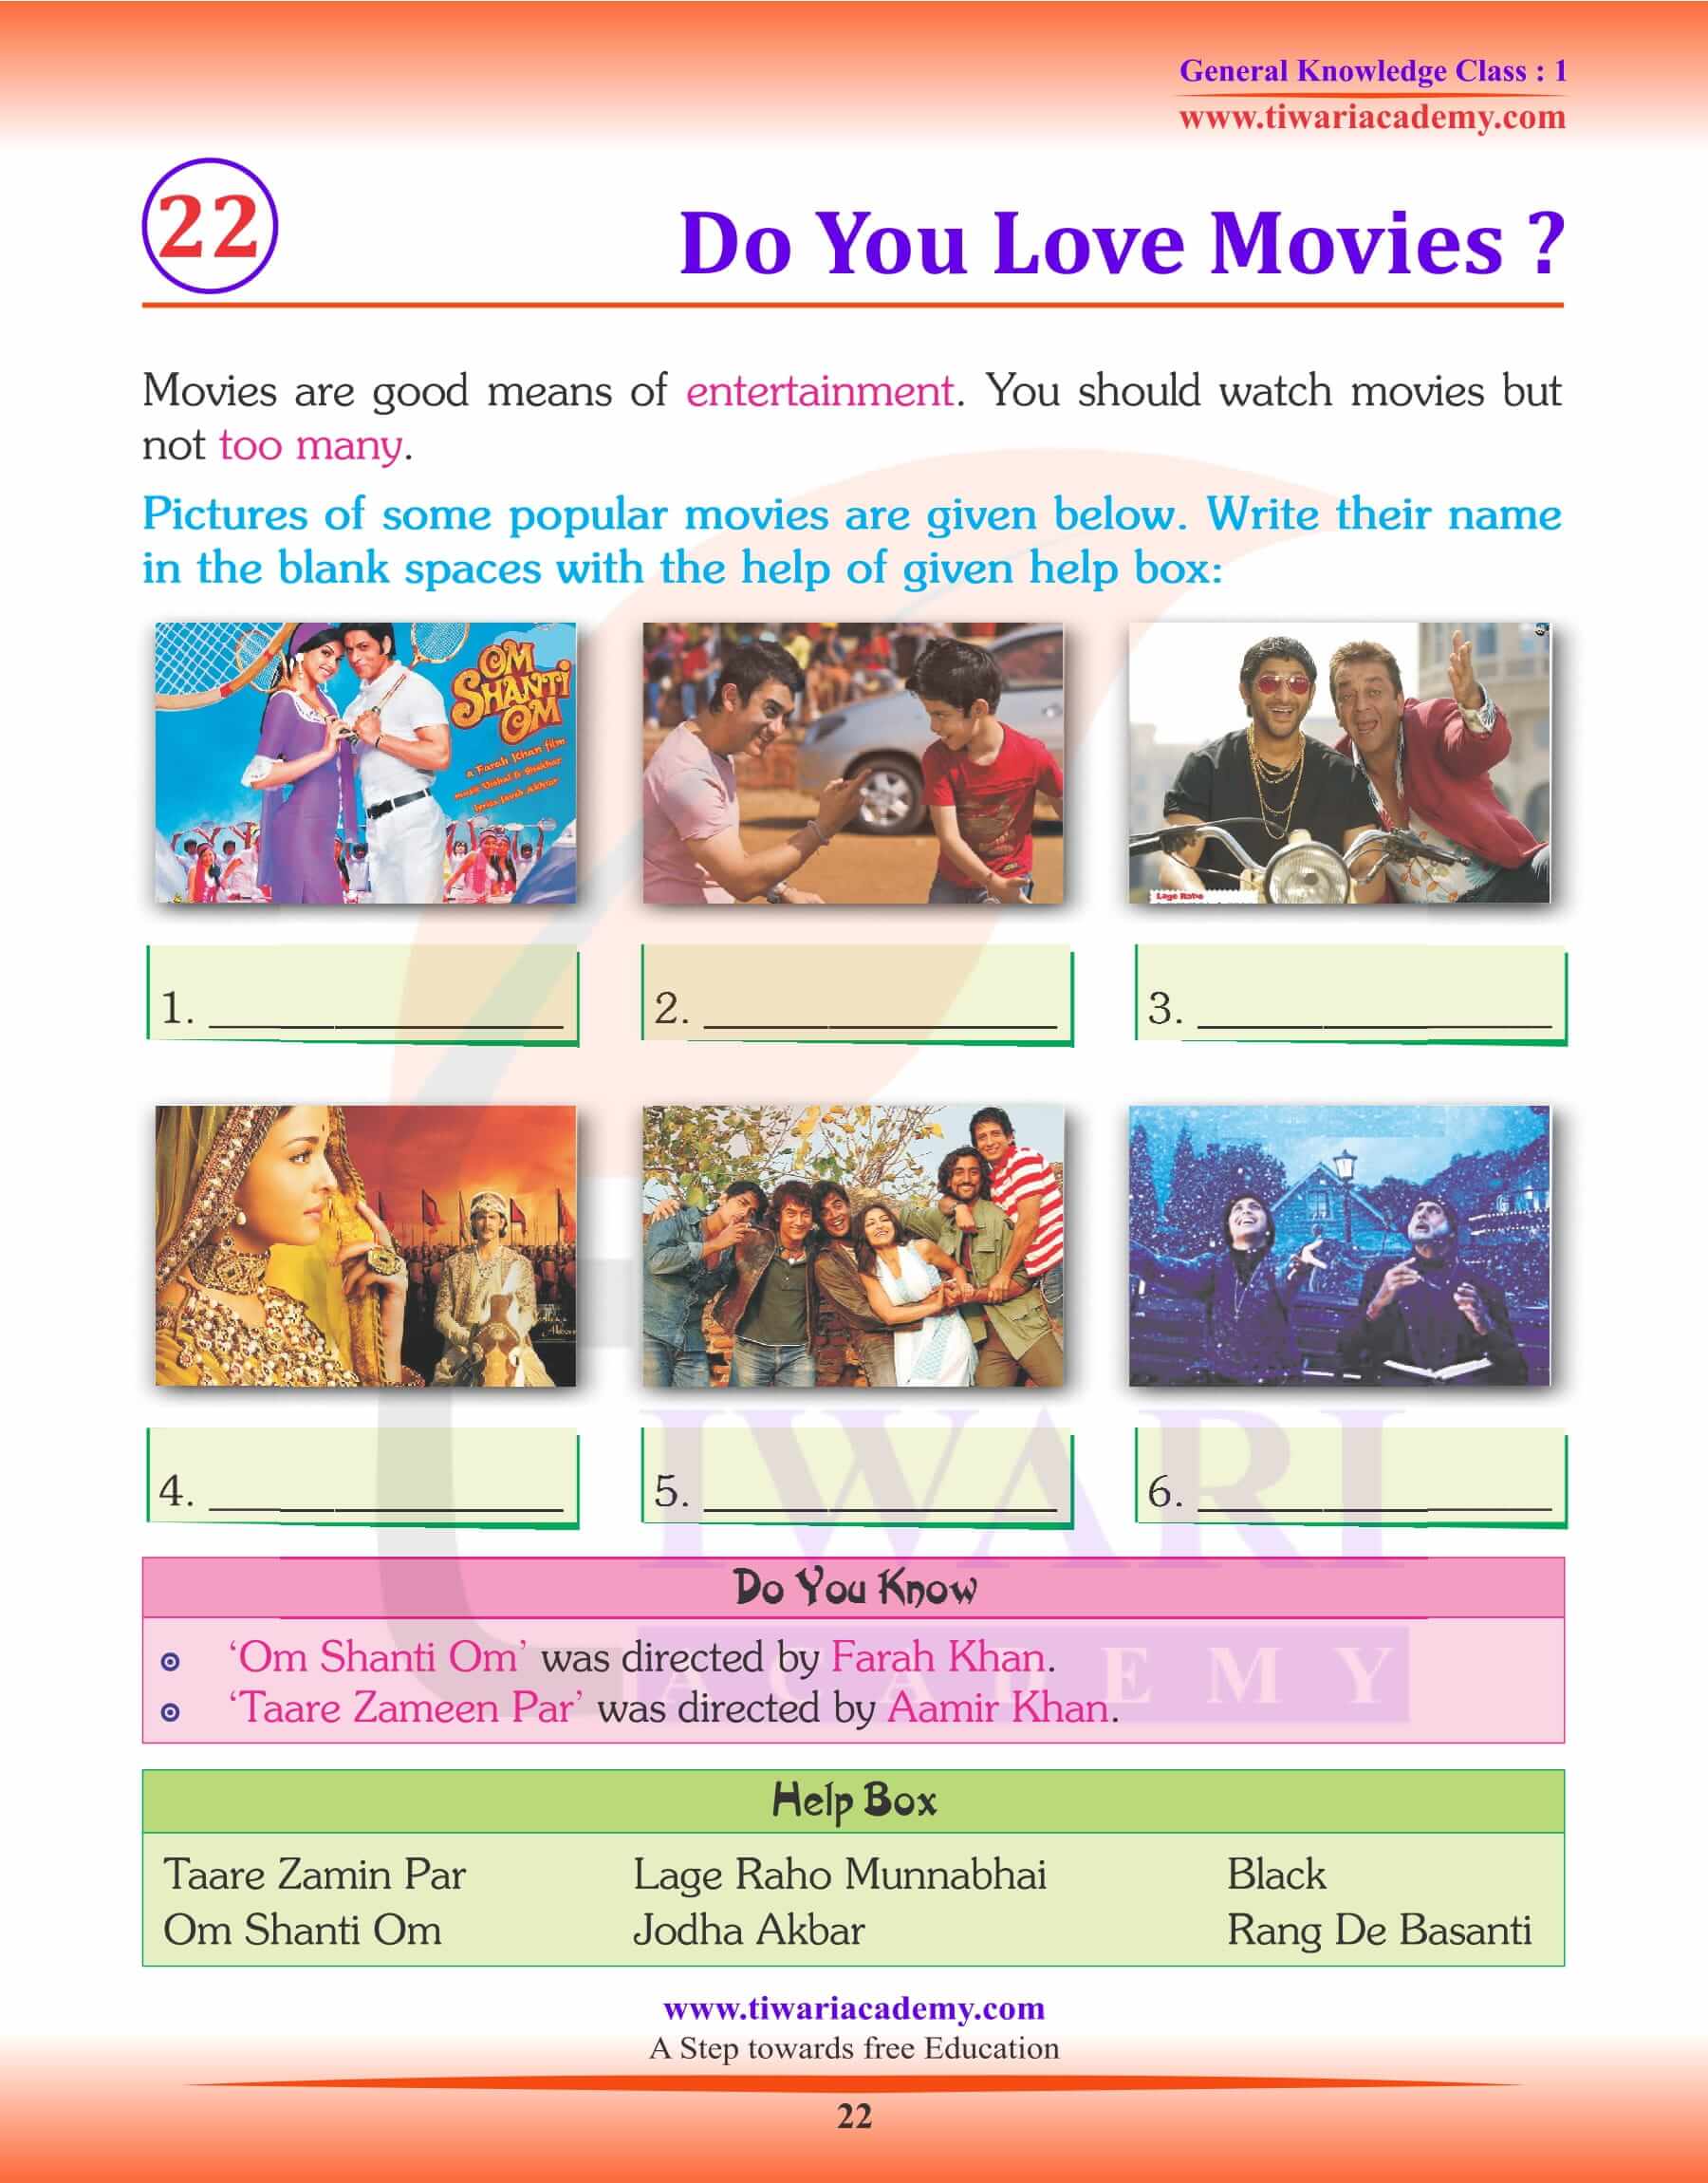 Do You Love Movies?